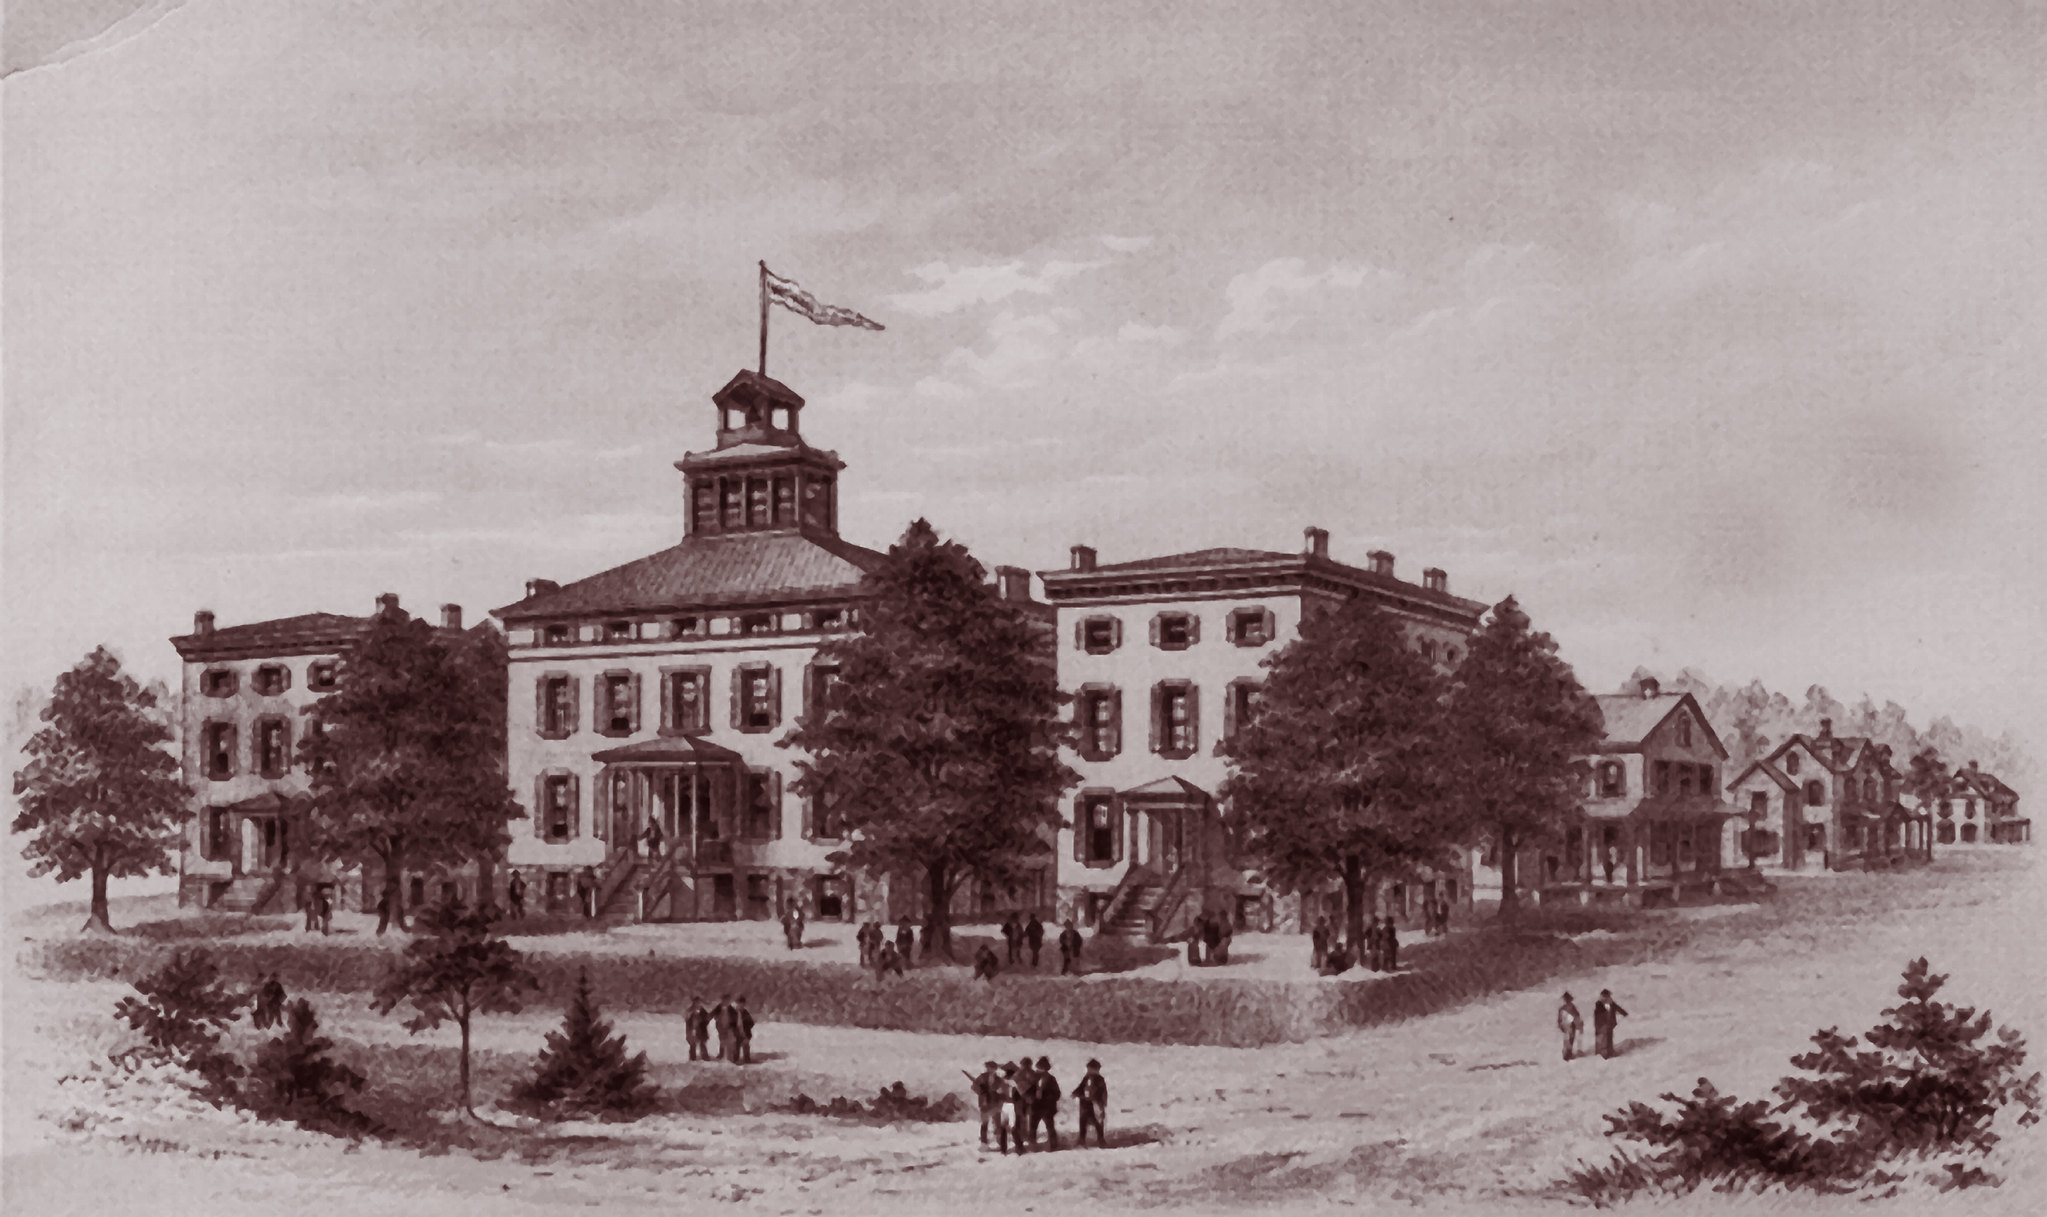 The Hill Dorms in 1860